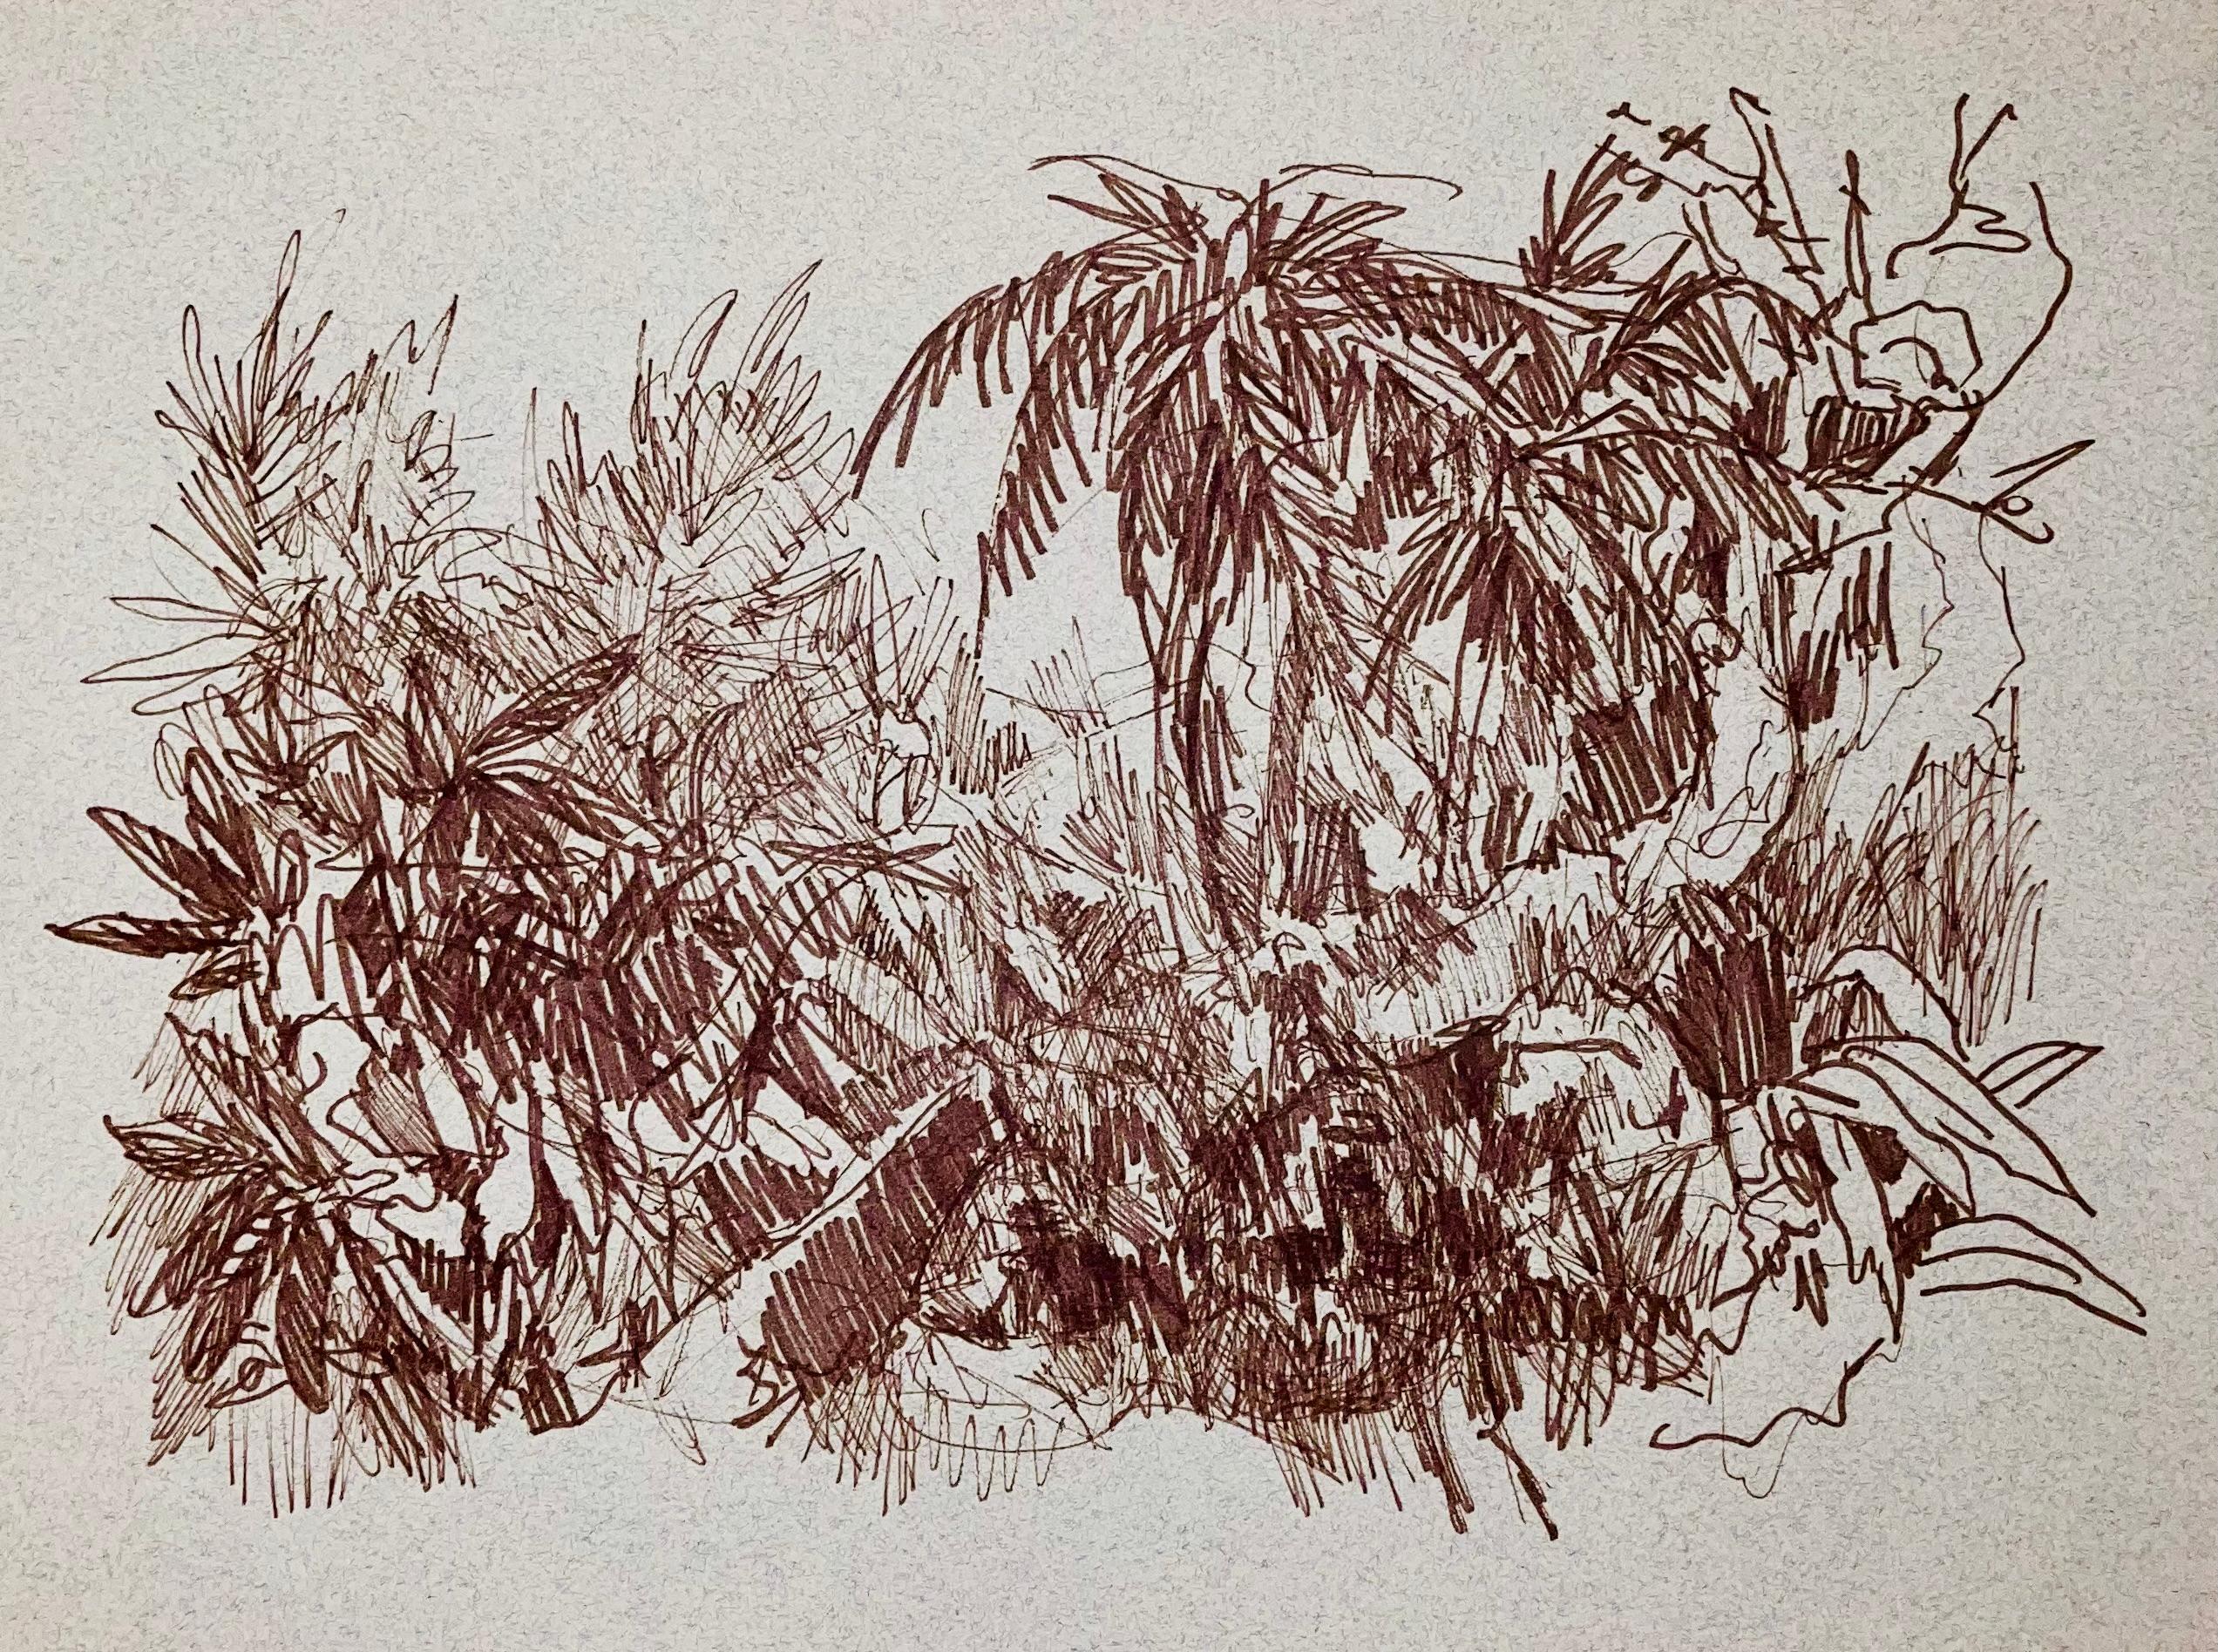 (Abstract Tropical Landscape) Untitled, 2001, Ian Hornak — Drawing